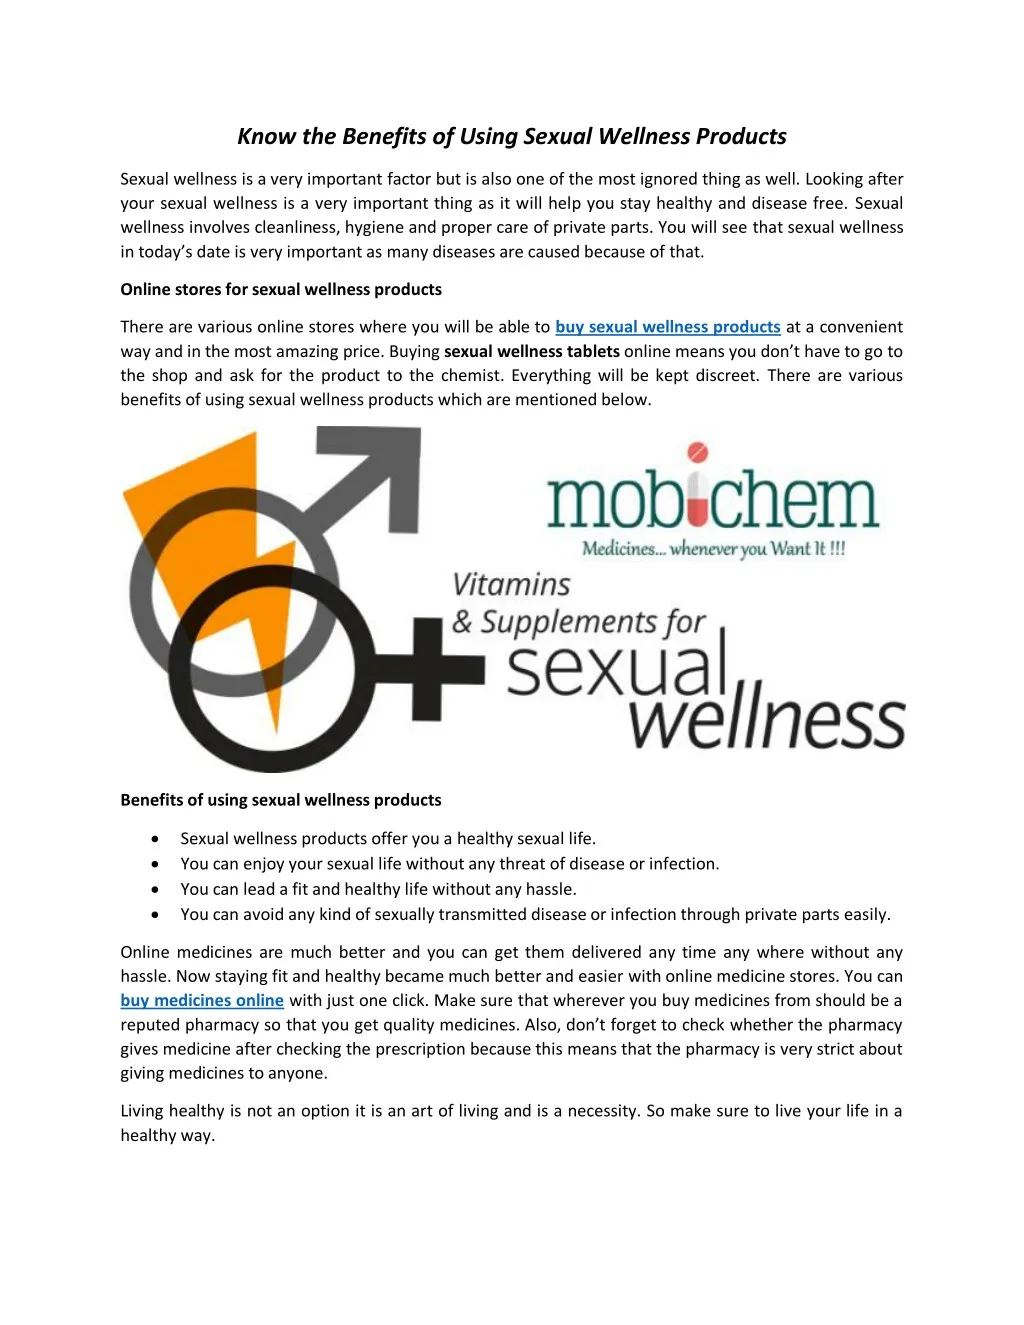 know the benefits of using sexual wellness